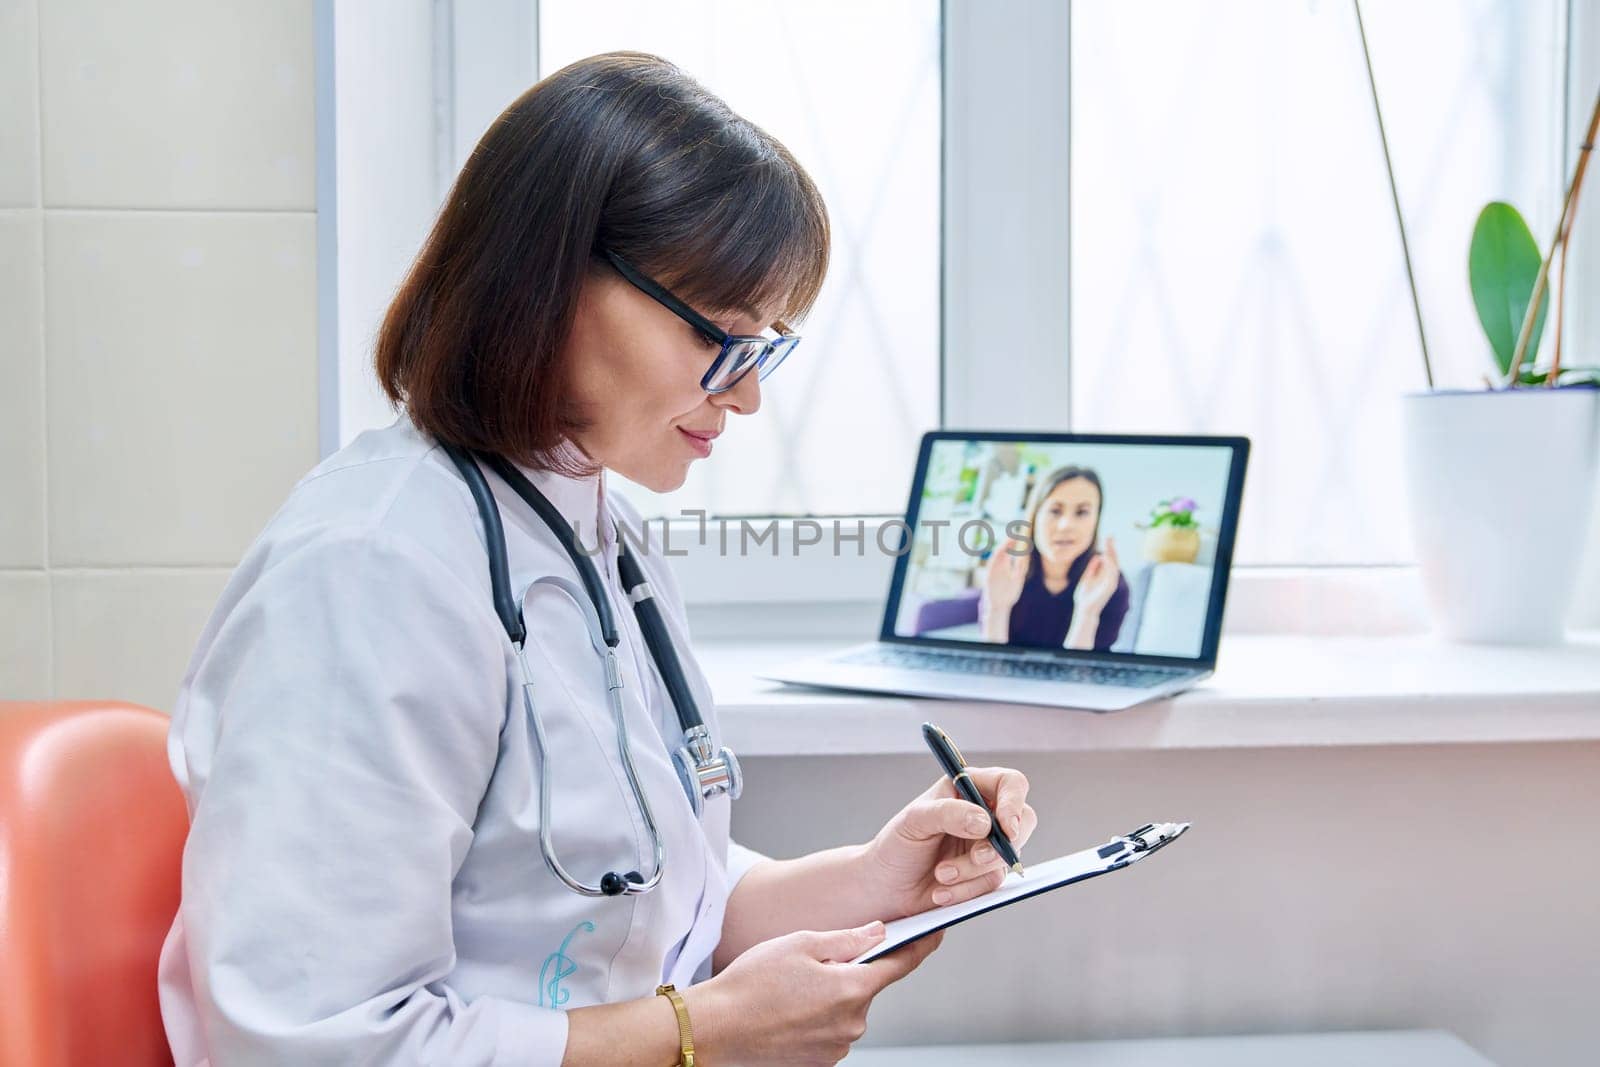 General practitioner doctor talking on videoconference with female patient by VH-studio